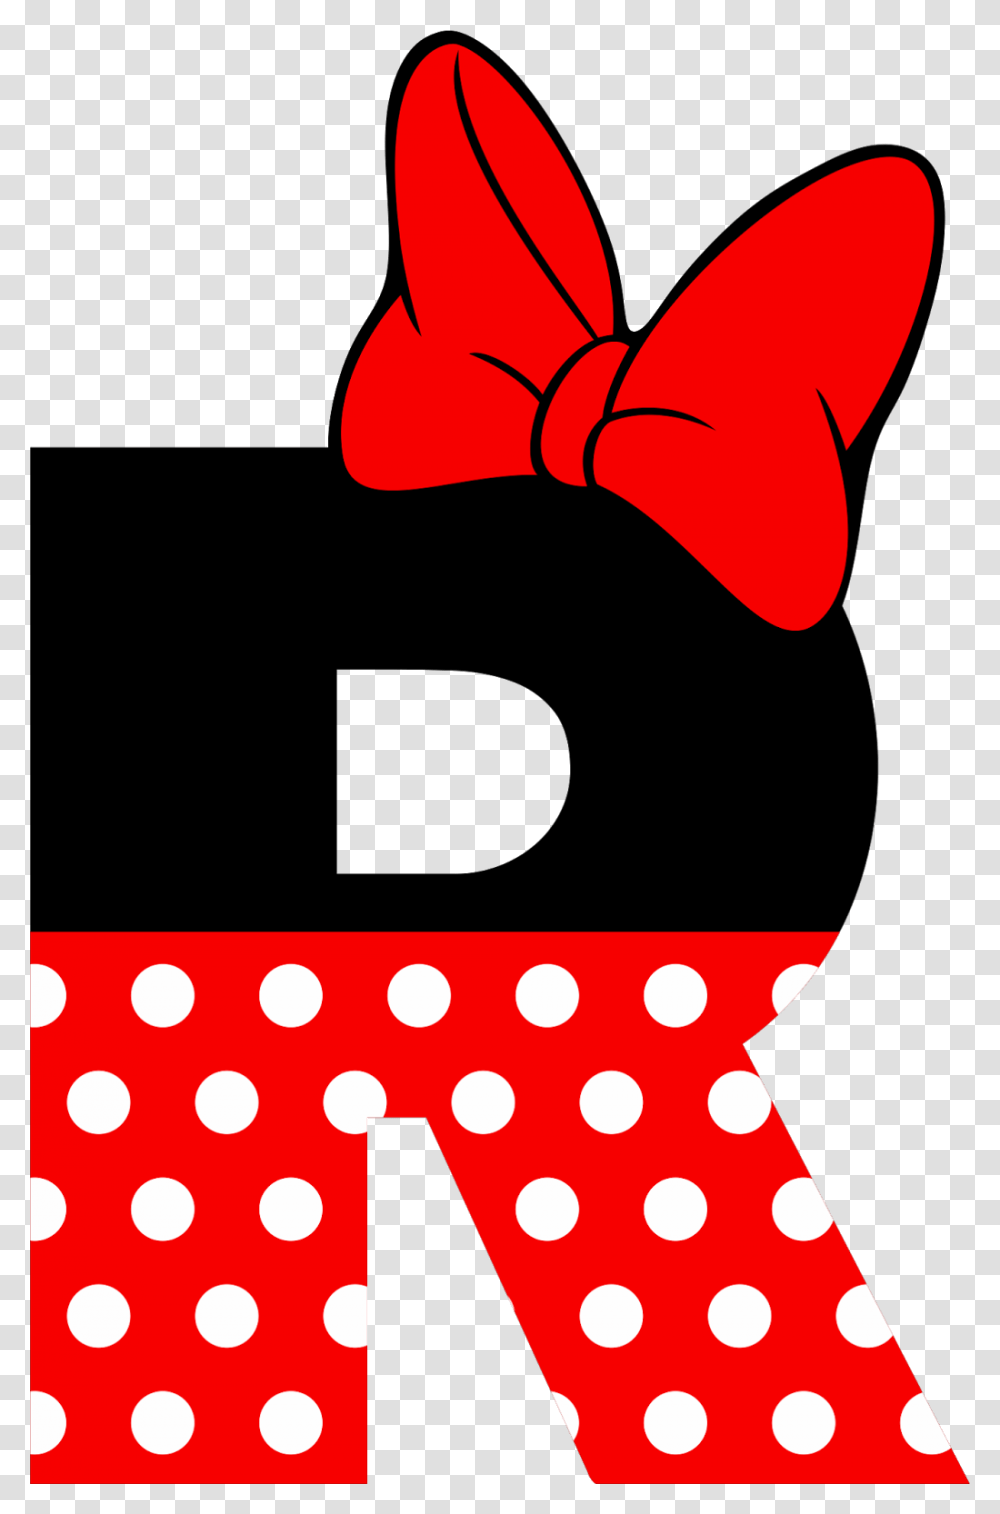 Mickey And Minnie Mouse Letras De Mickey Mouse, Tie, Accessories, Accessory, Texture Transparent Png